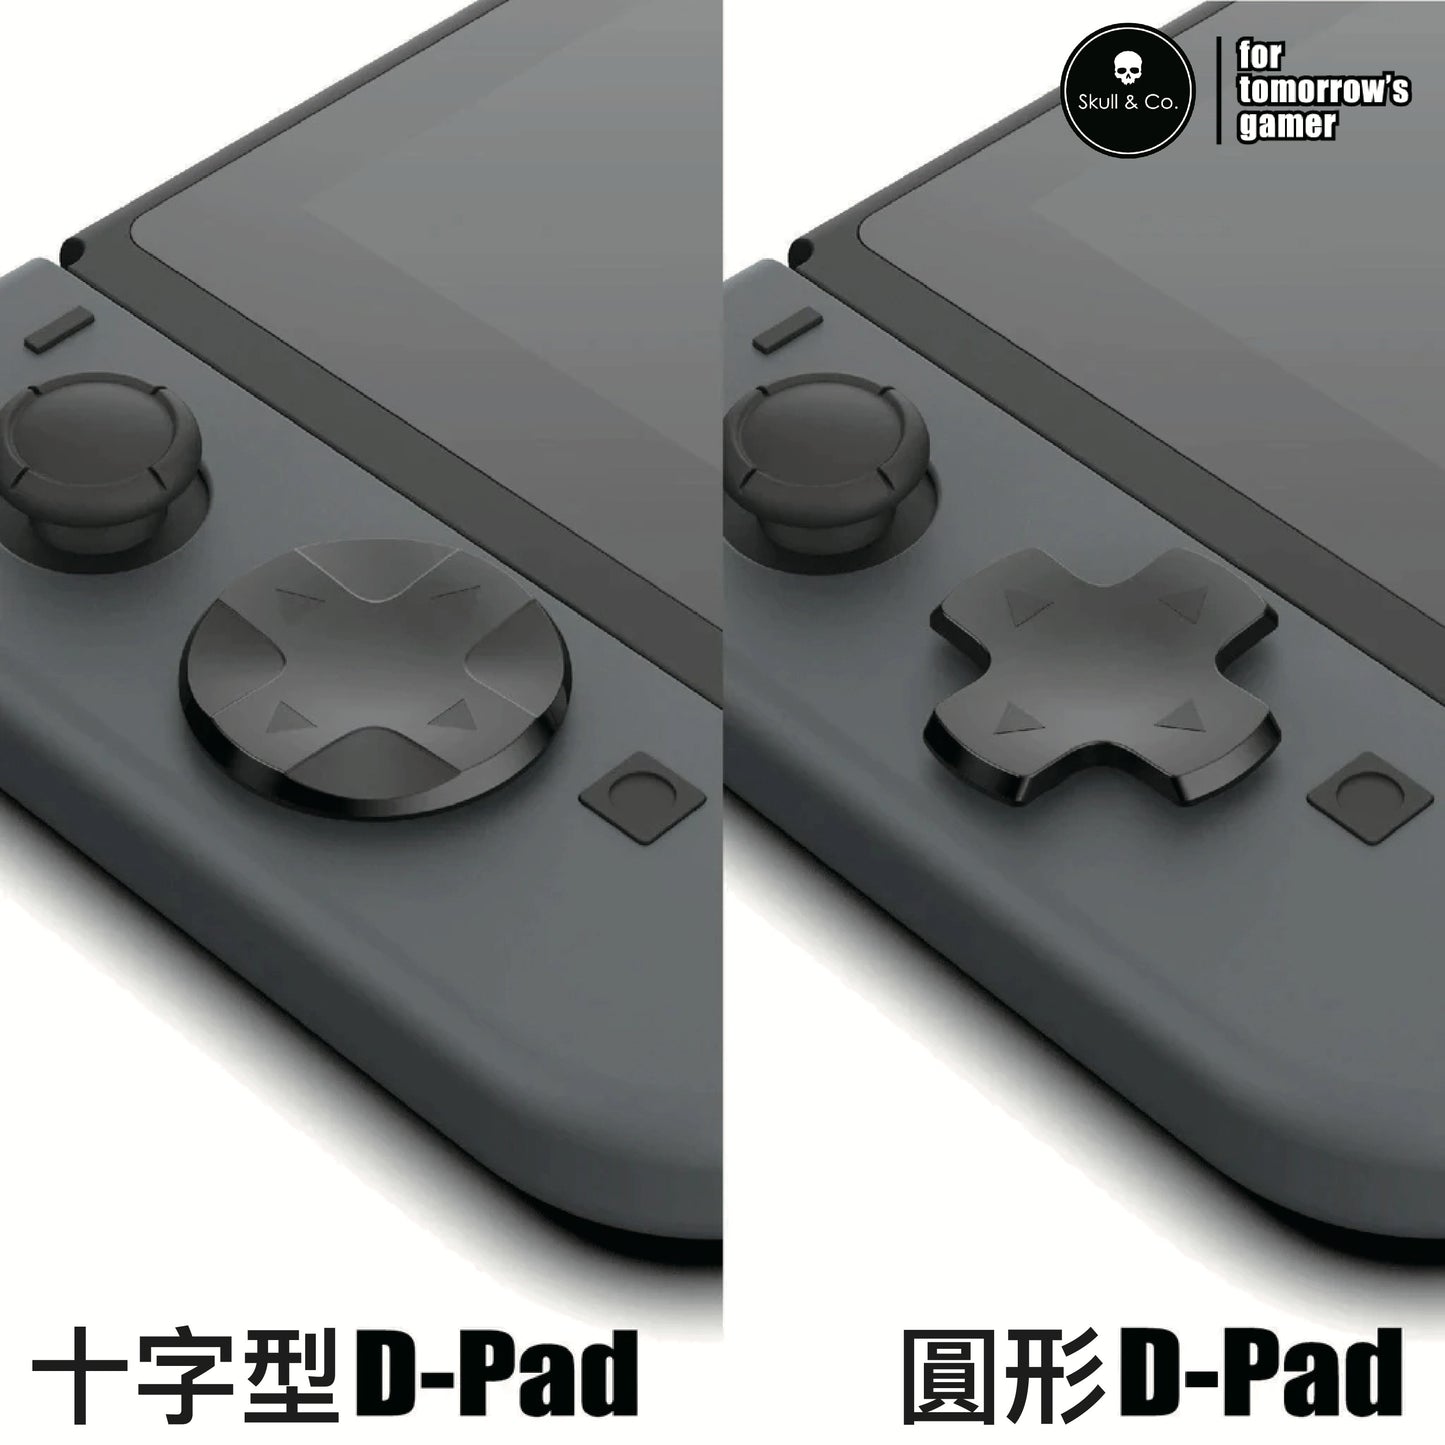 D-PAD keycaps/cross keys/direction keys are suitable for Nintendo Switch/OLED